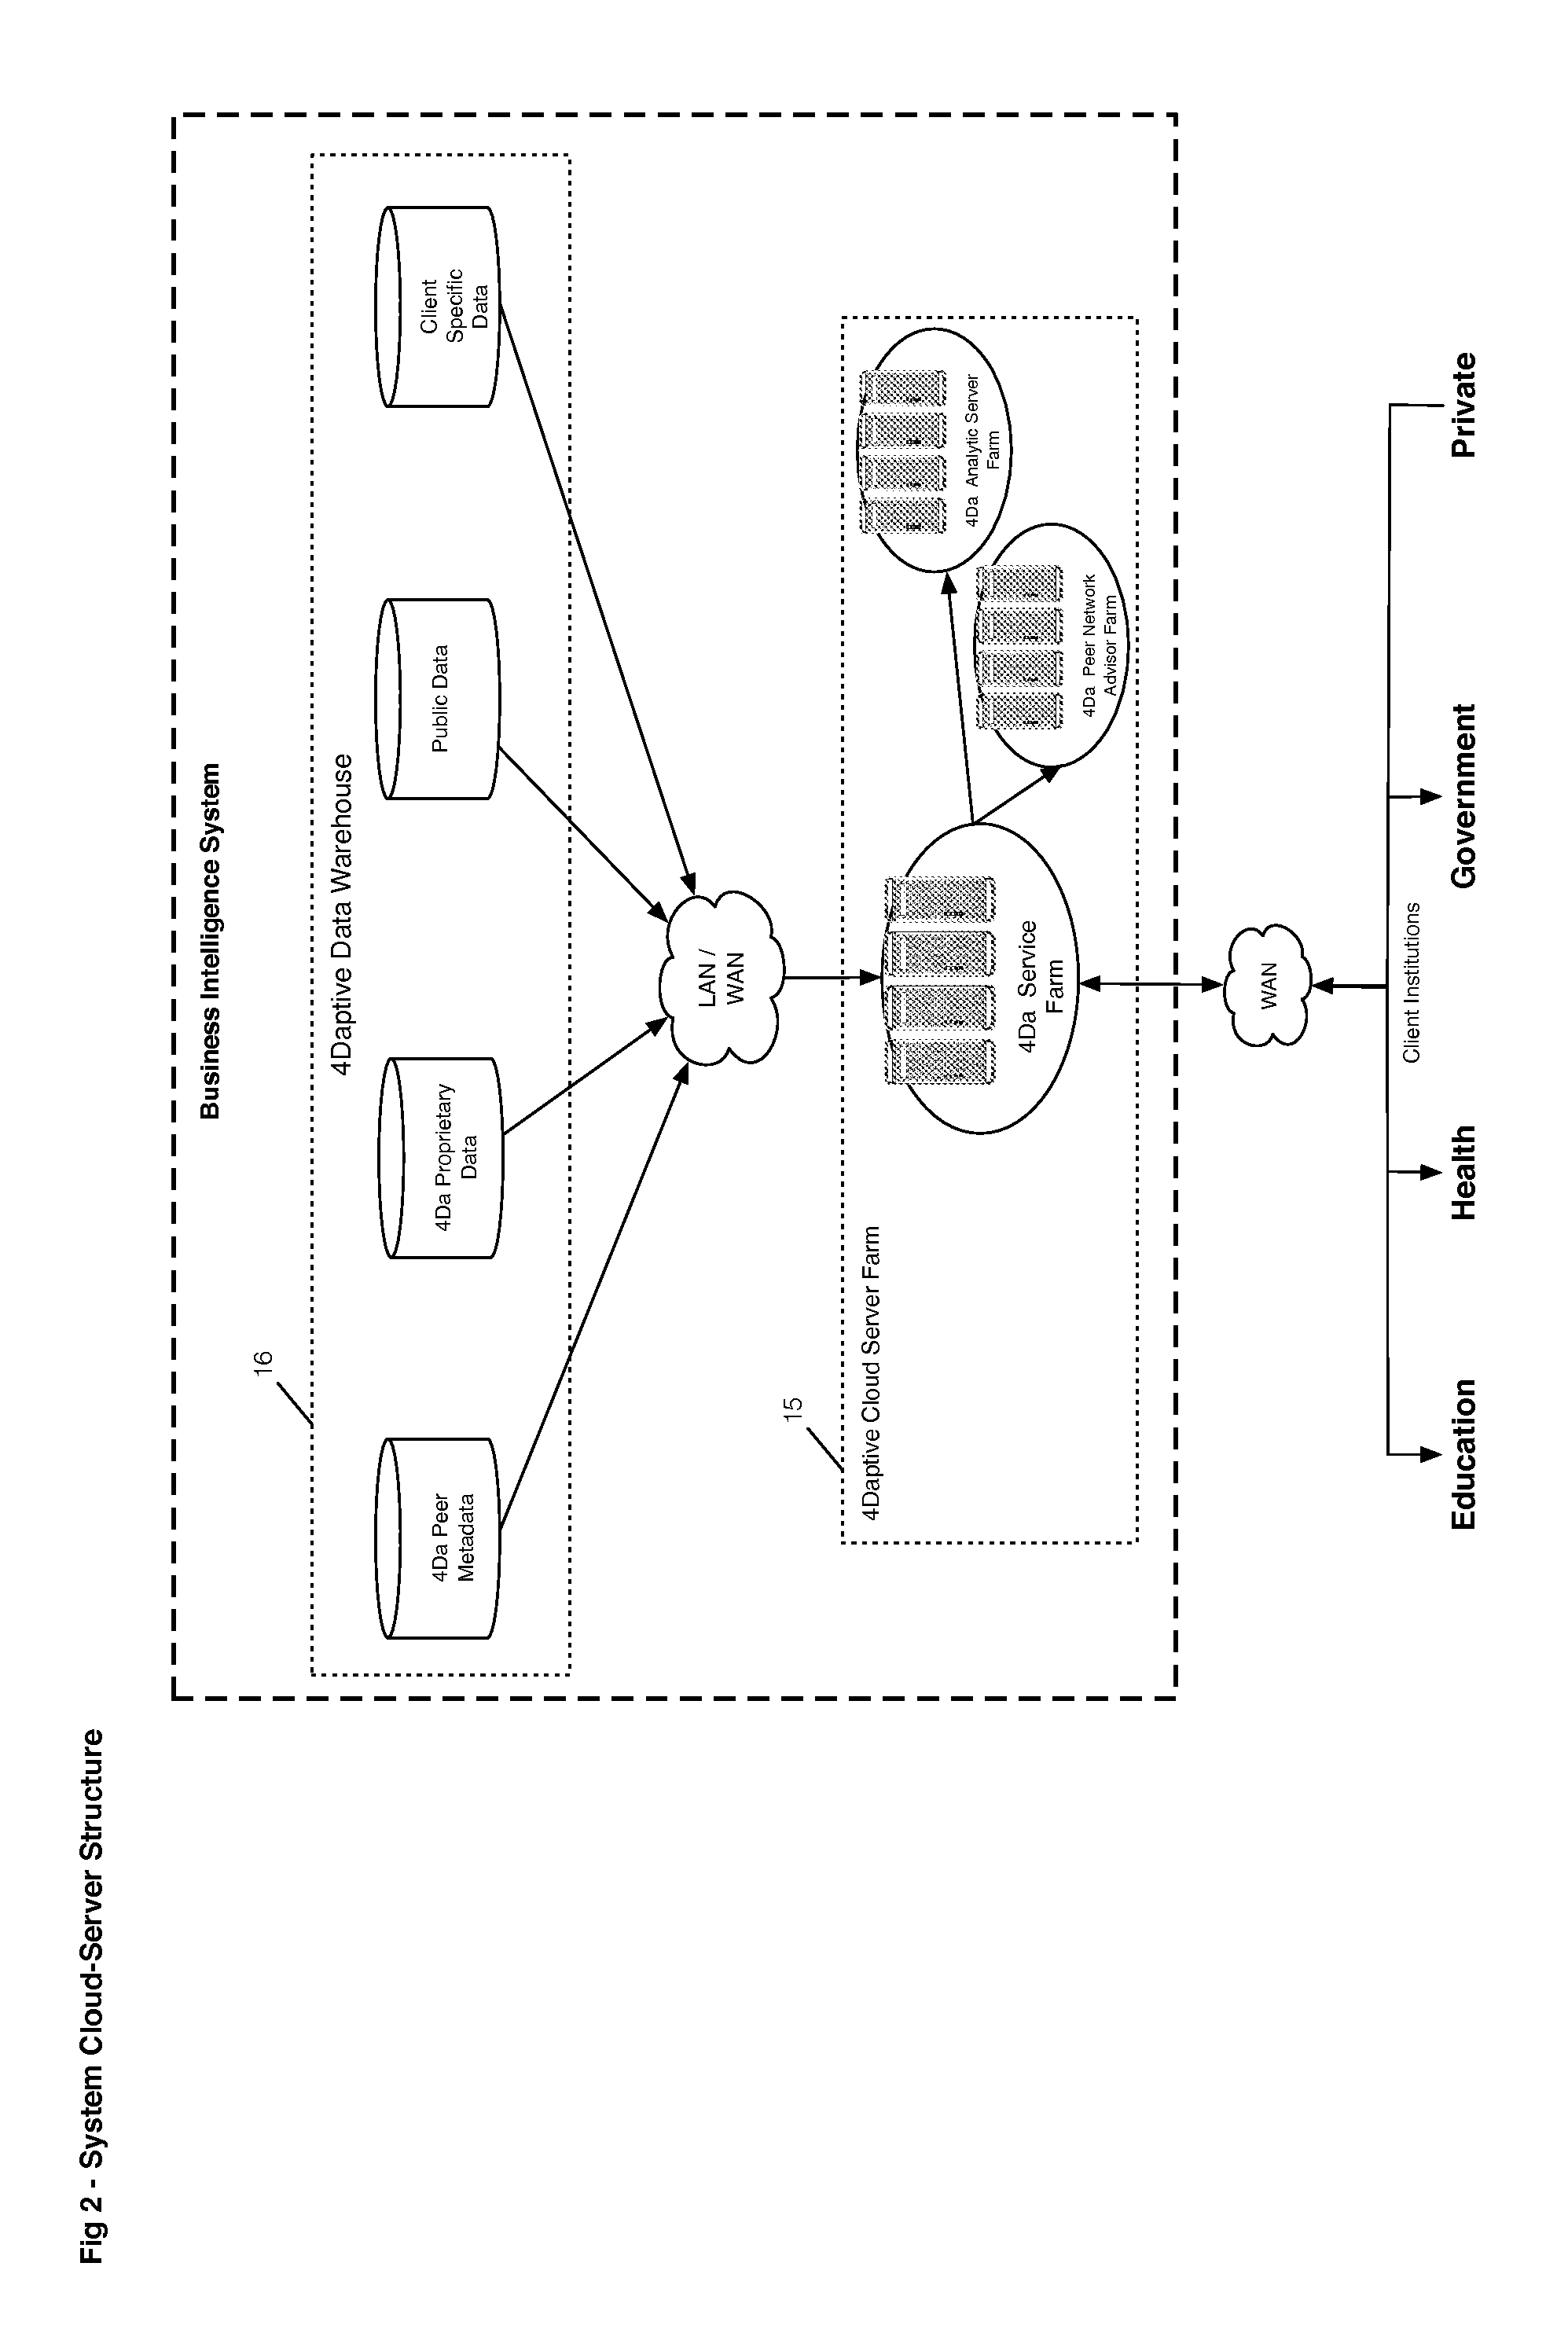 Business intelligence system and method utilizing multidimensional analysis of a plurality of transformed and scaled data streams